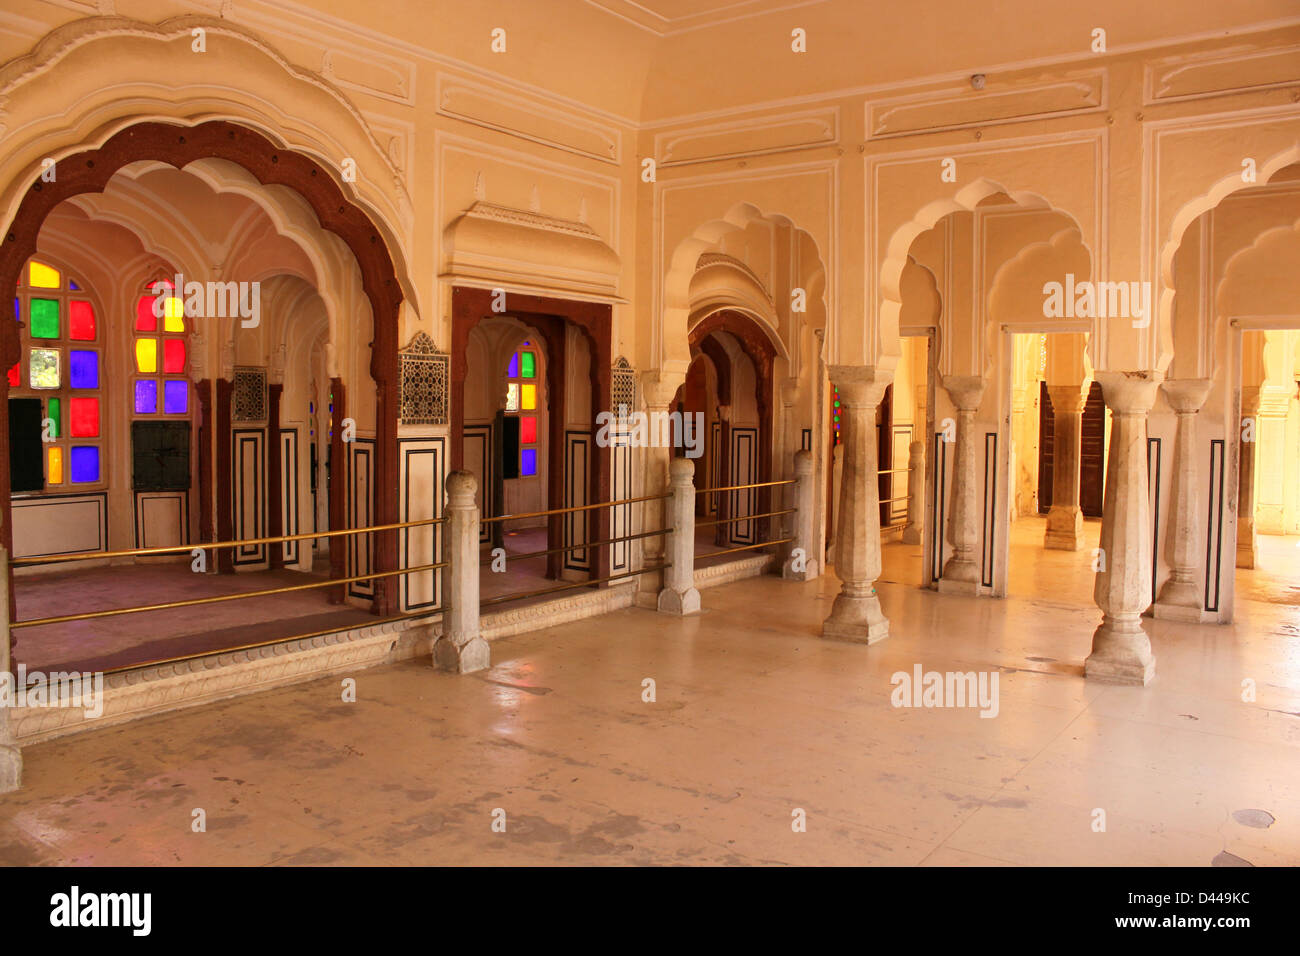 Pillars ans arched structure inside Hawa mahal, Palace of winds Jaipur Rajasthan India Stock Photo